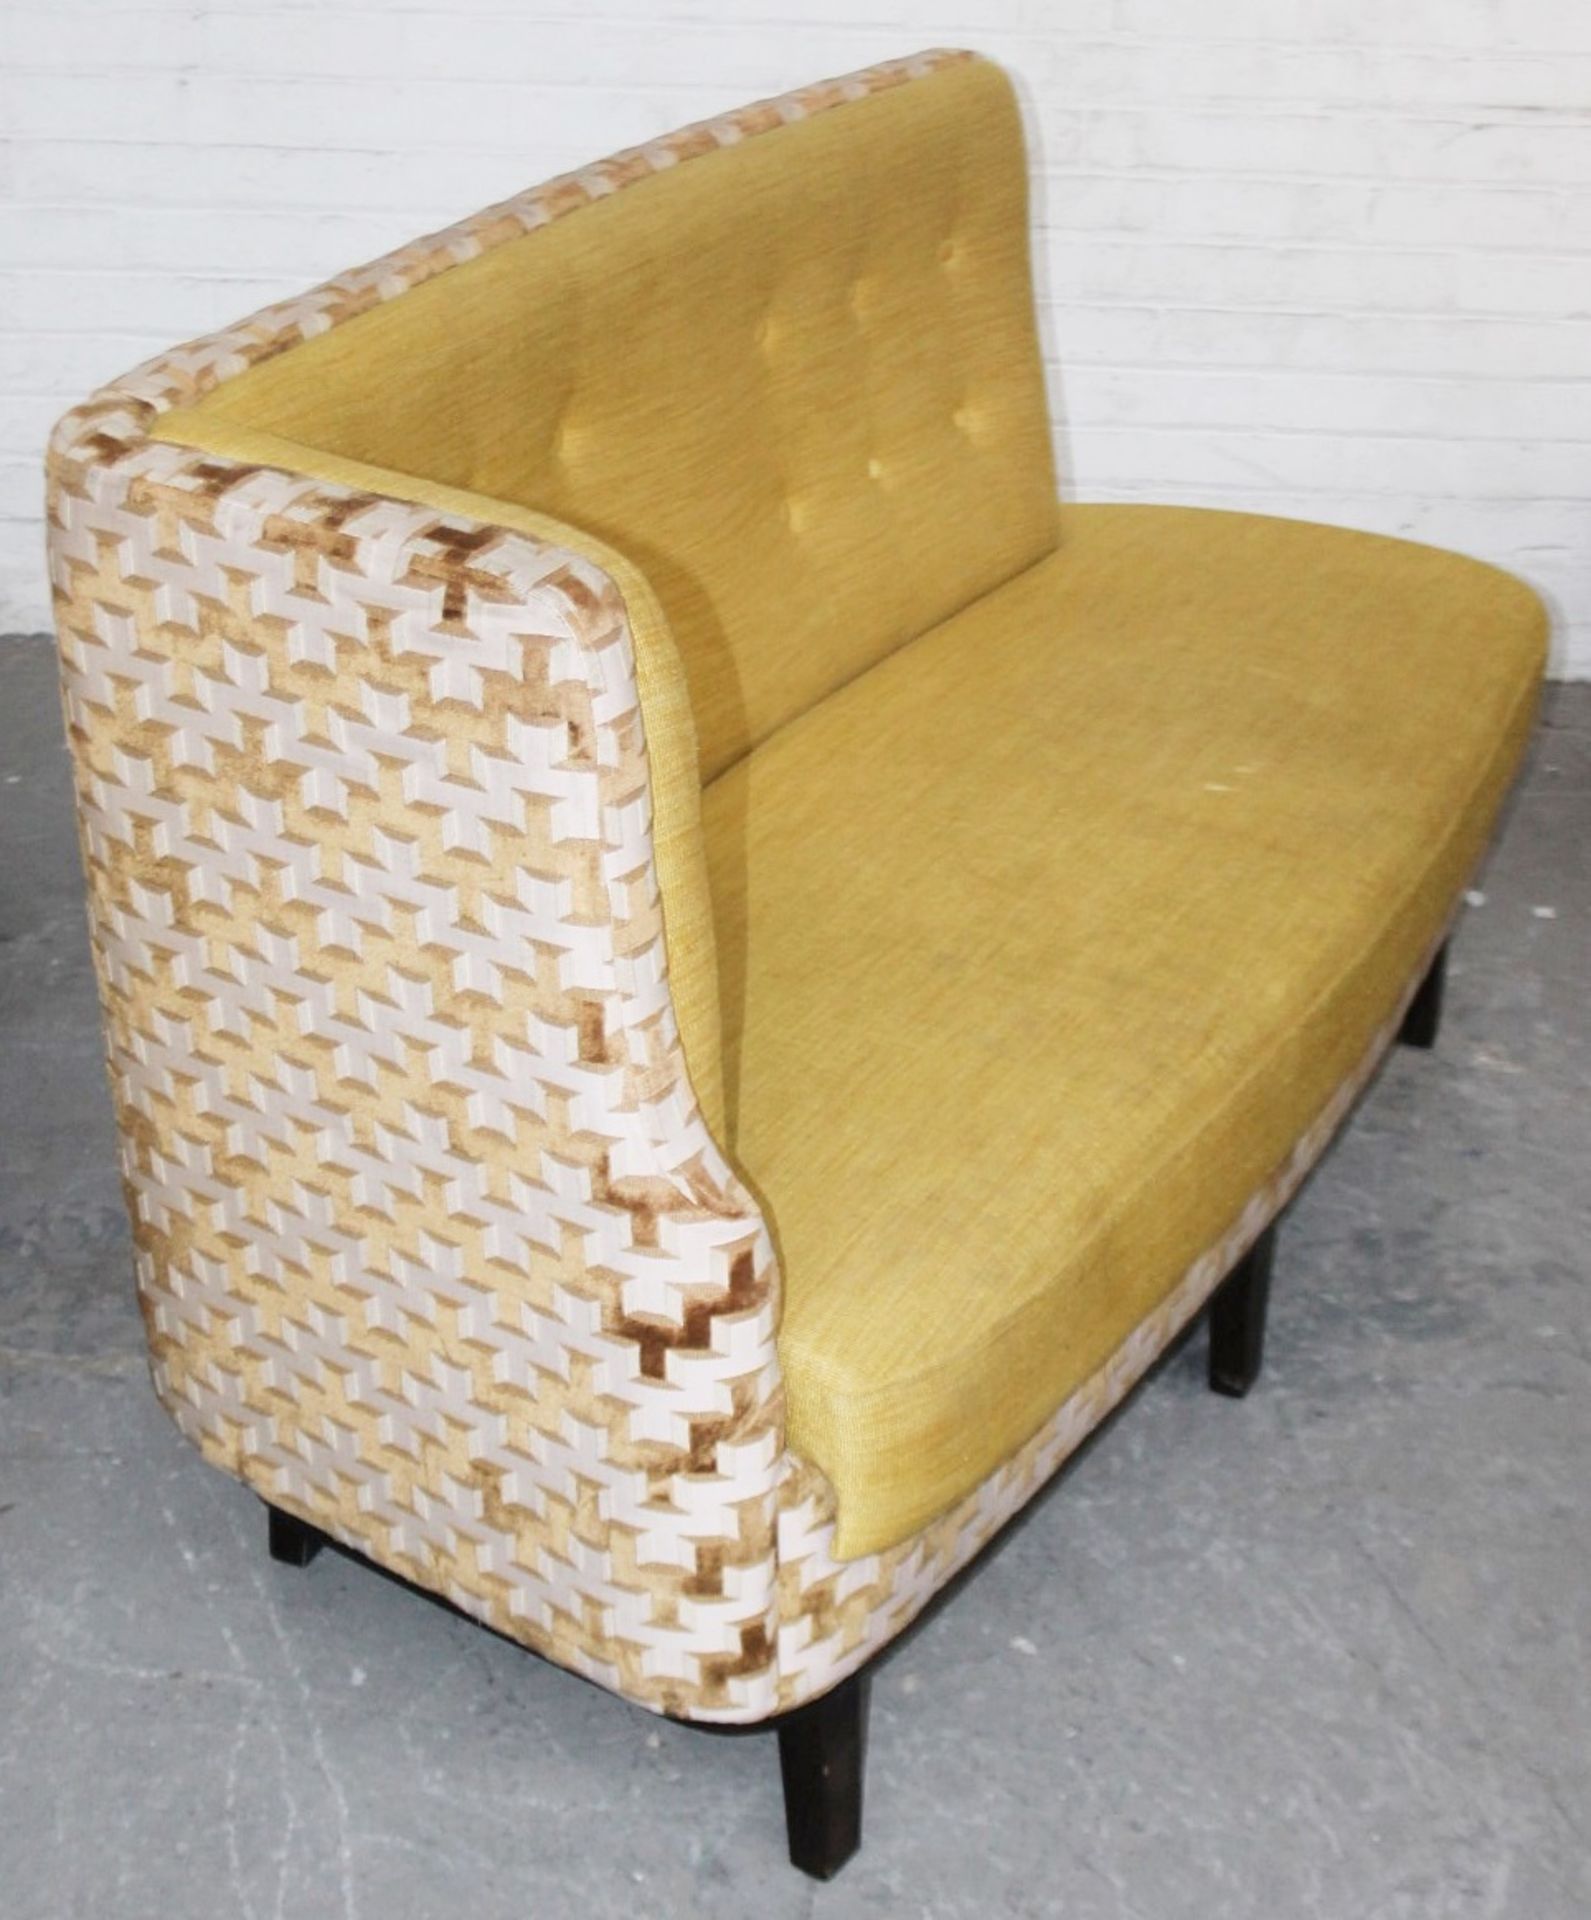 1 x Commercial Freestanding Left-Hand 2-Seater Bench, Upholstered In Premium Gold-Coloured - Image 4 of 8